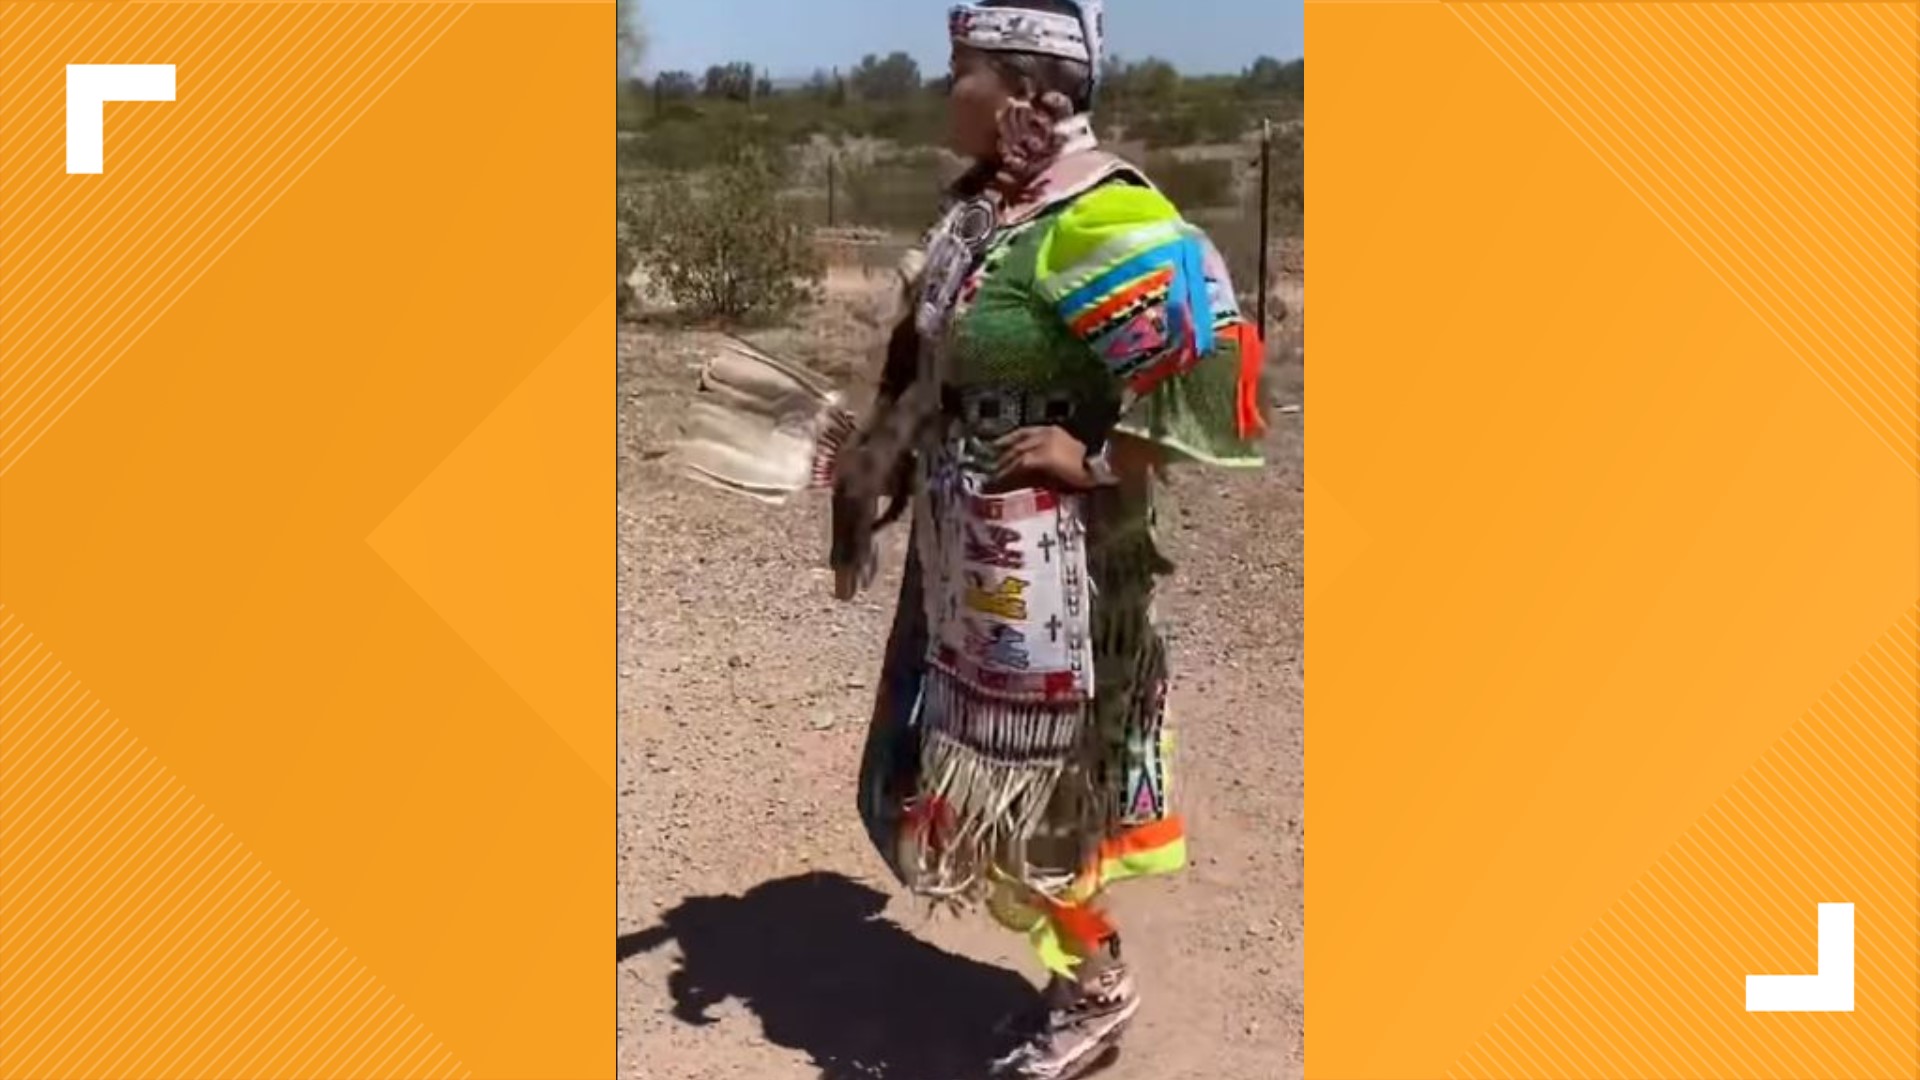 With Pow Wow cancelled because of the Coronavirus, a Valley couple created a virtual dance competition to bring tribes across the U.S. together.